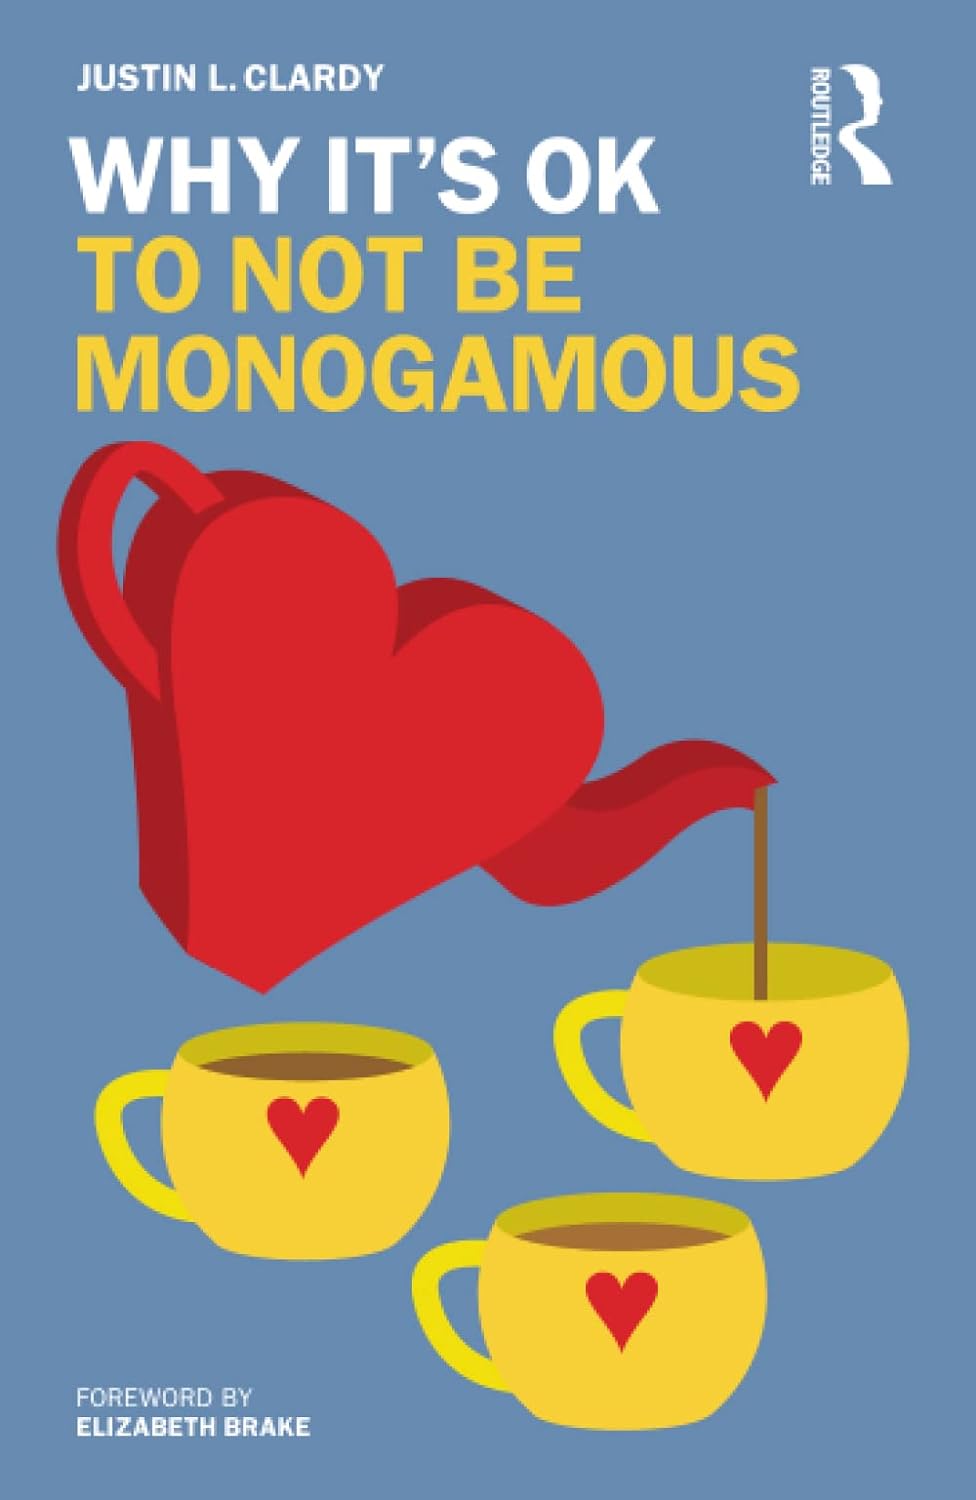 Why It's OK to Not Be Monogamous